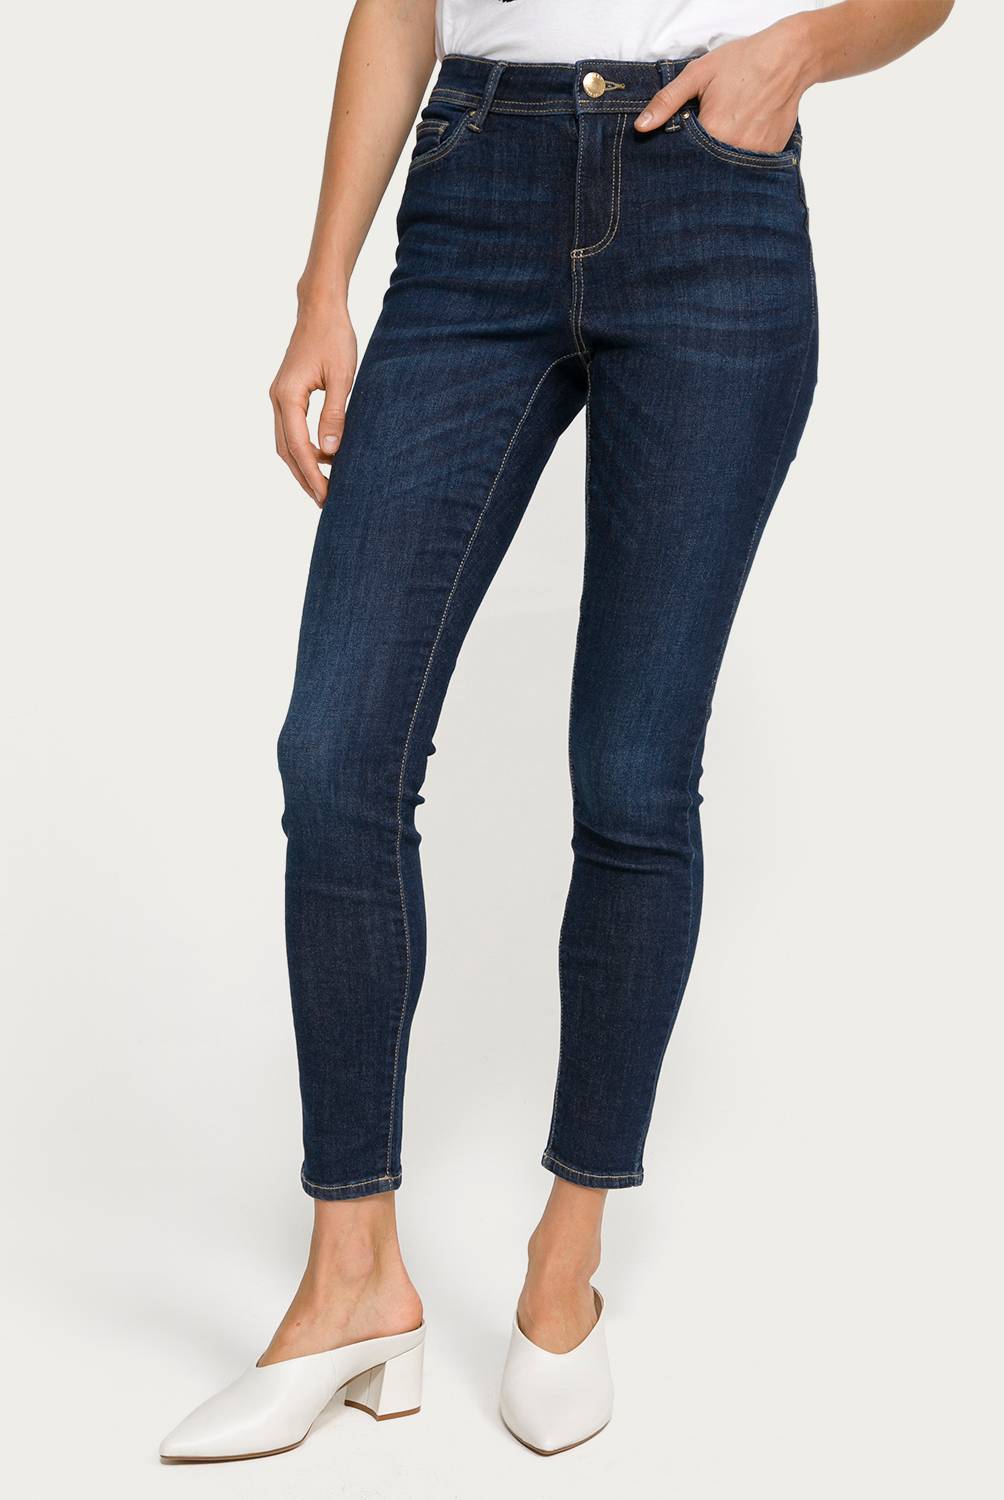 ONLY - Jeans Mujer